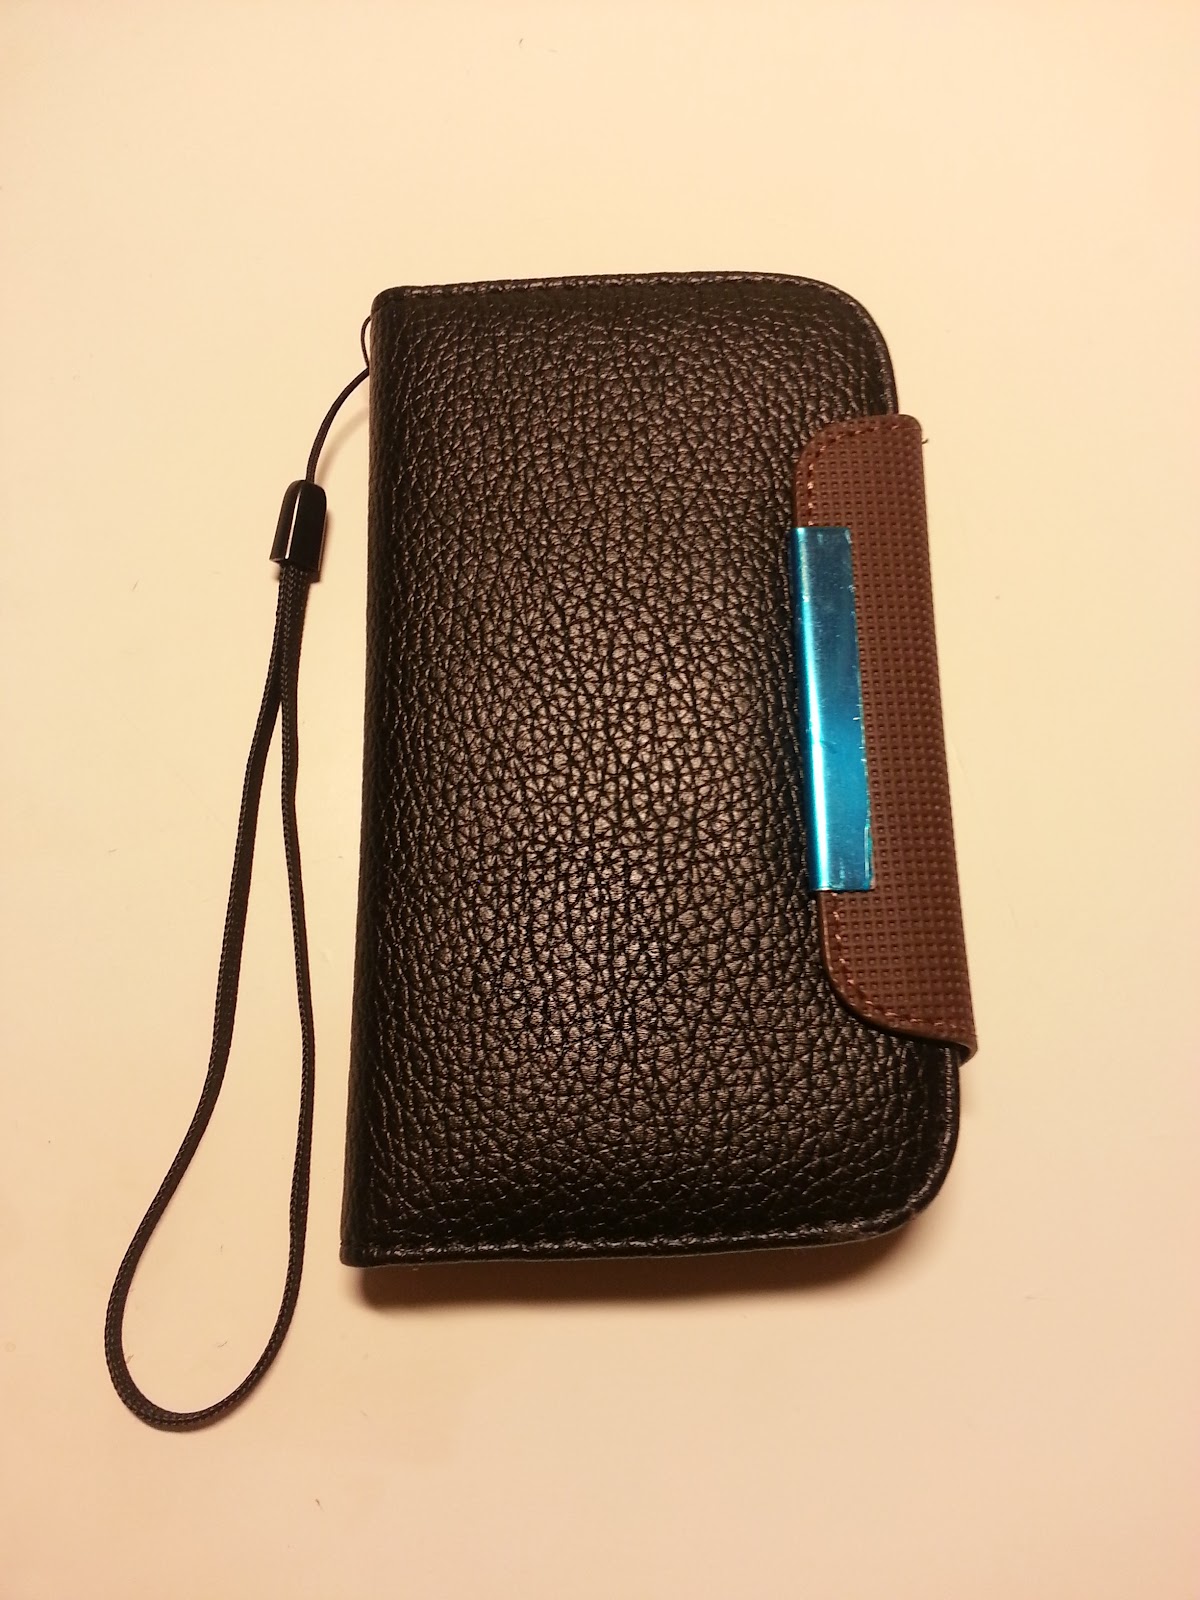 Samsung Galaxy S3 flip case (with card holder + strap) review and ...